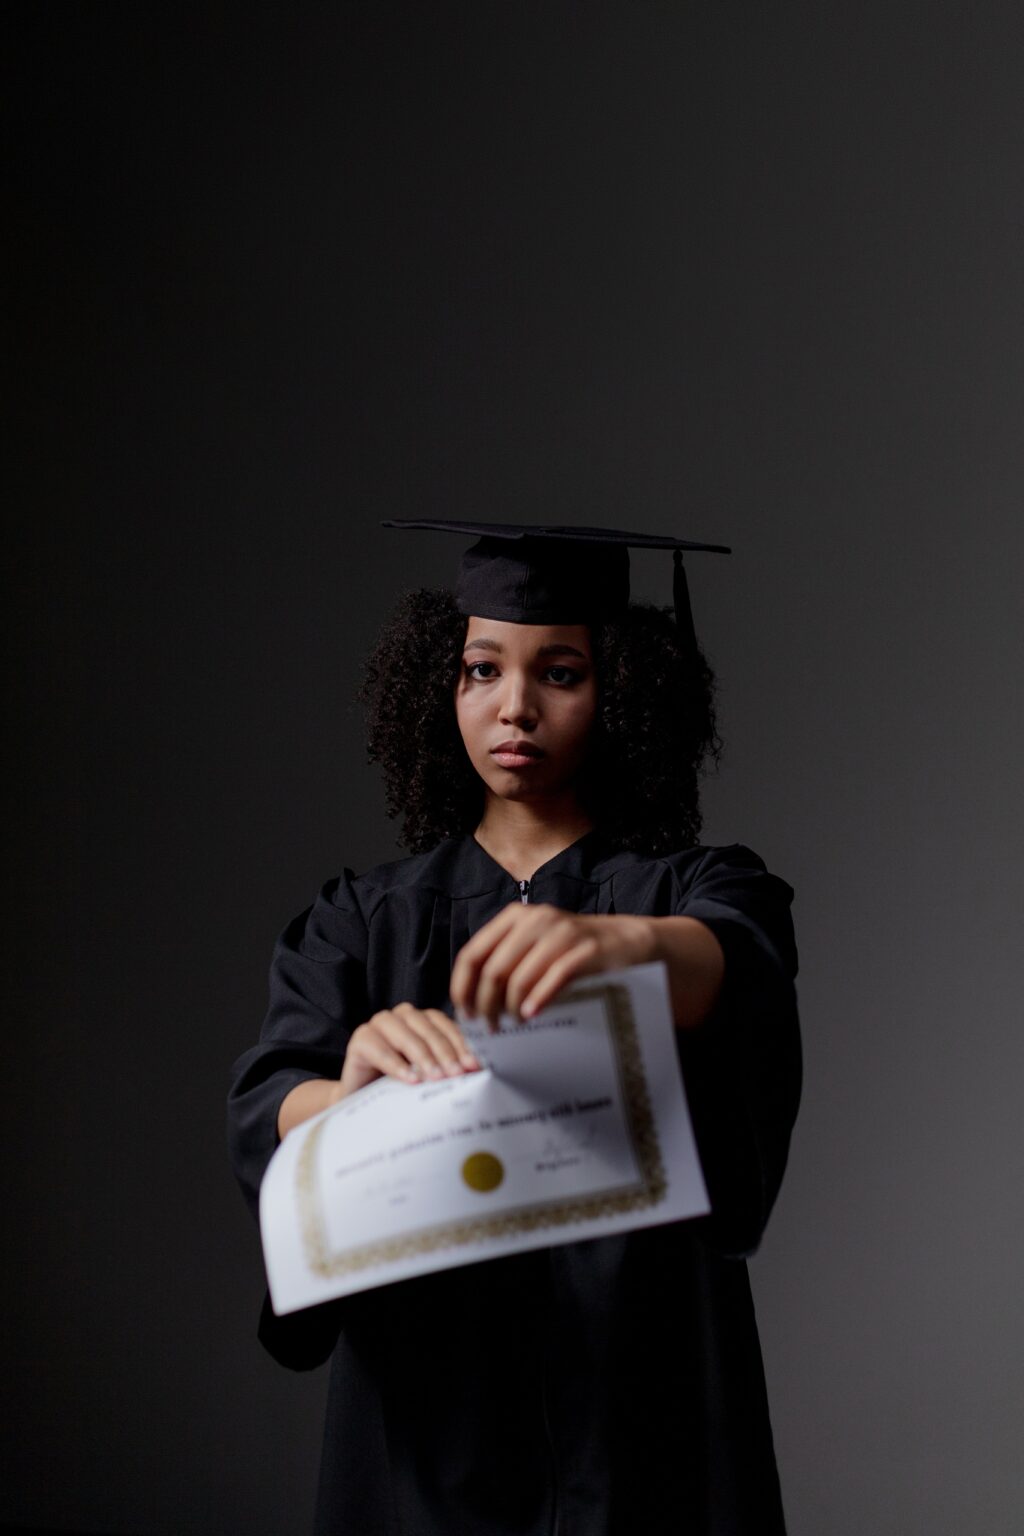 Photo by Ron Lach : https://www.pexels.com/photo/woman-in-black-academic-dress-tearing-her-diploma-9829315/